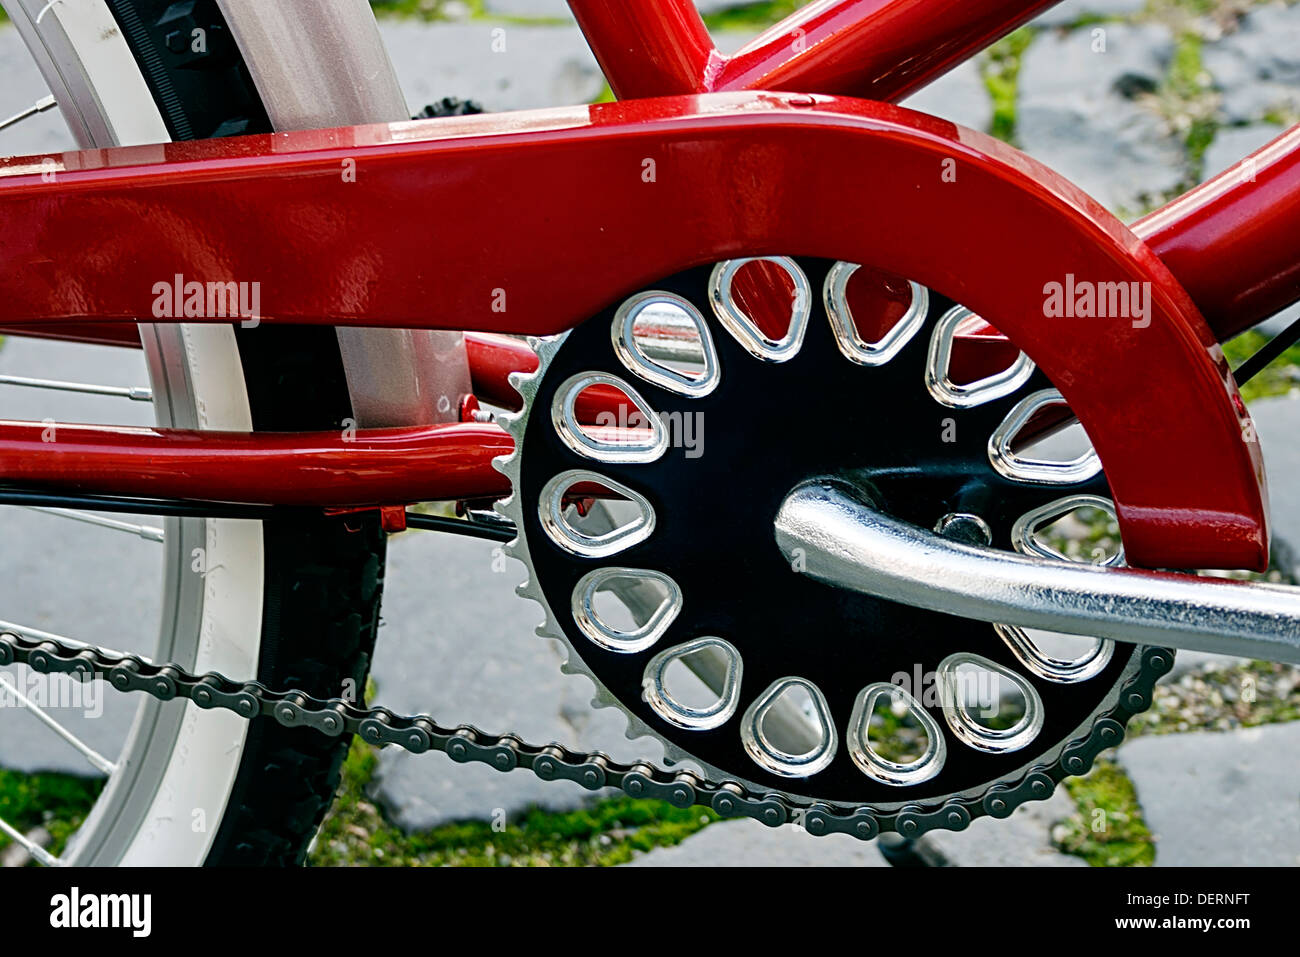 Detail of bicycle crank, chain, derailleur, red mudguards and rear wheel. Stock Photo